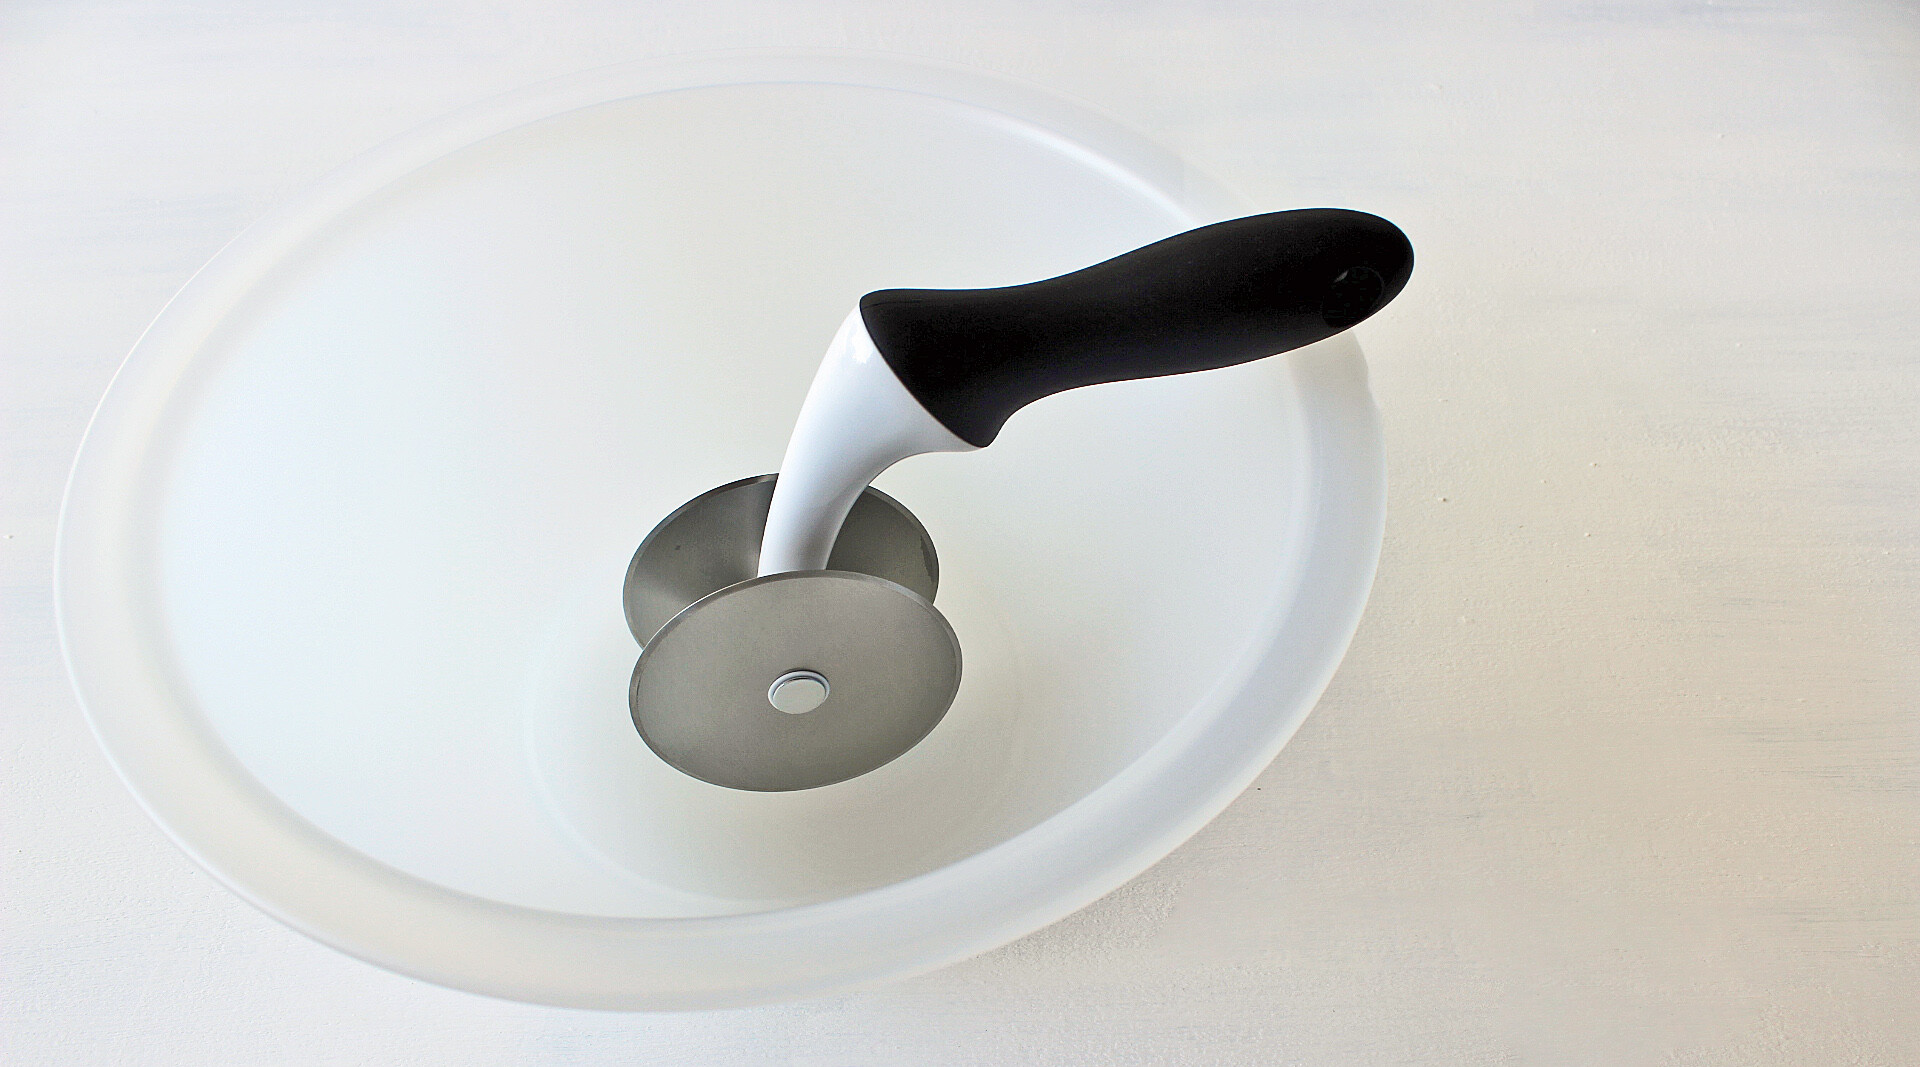 PRODUCT REVIEW: OXO SALAD CHOPPER AND BOWL